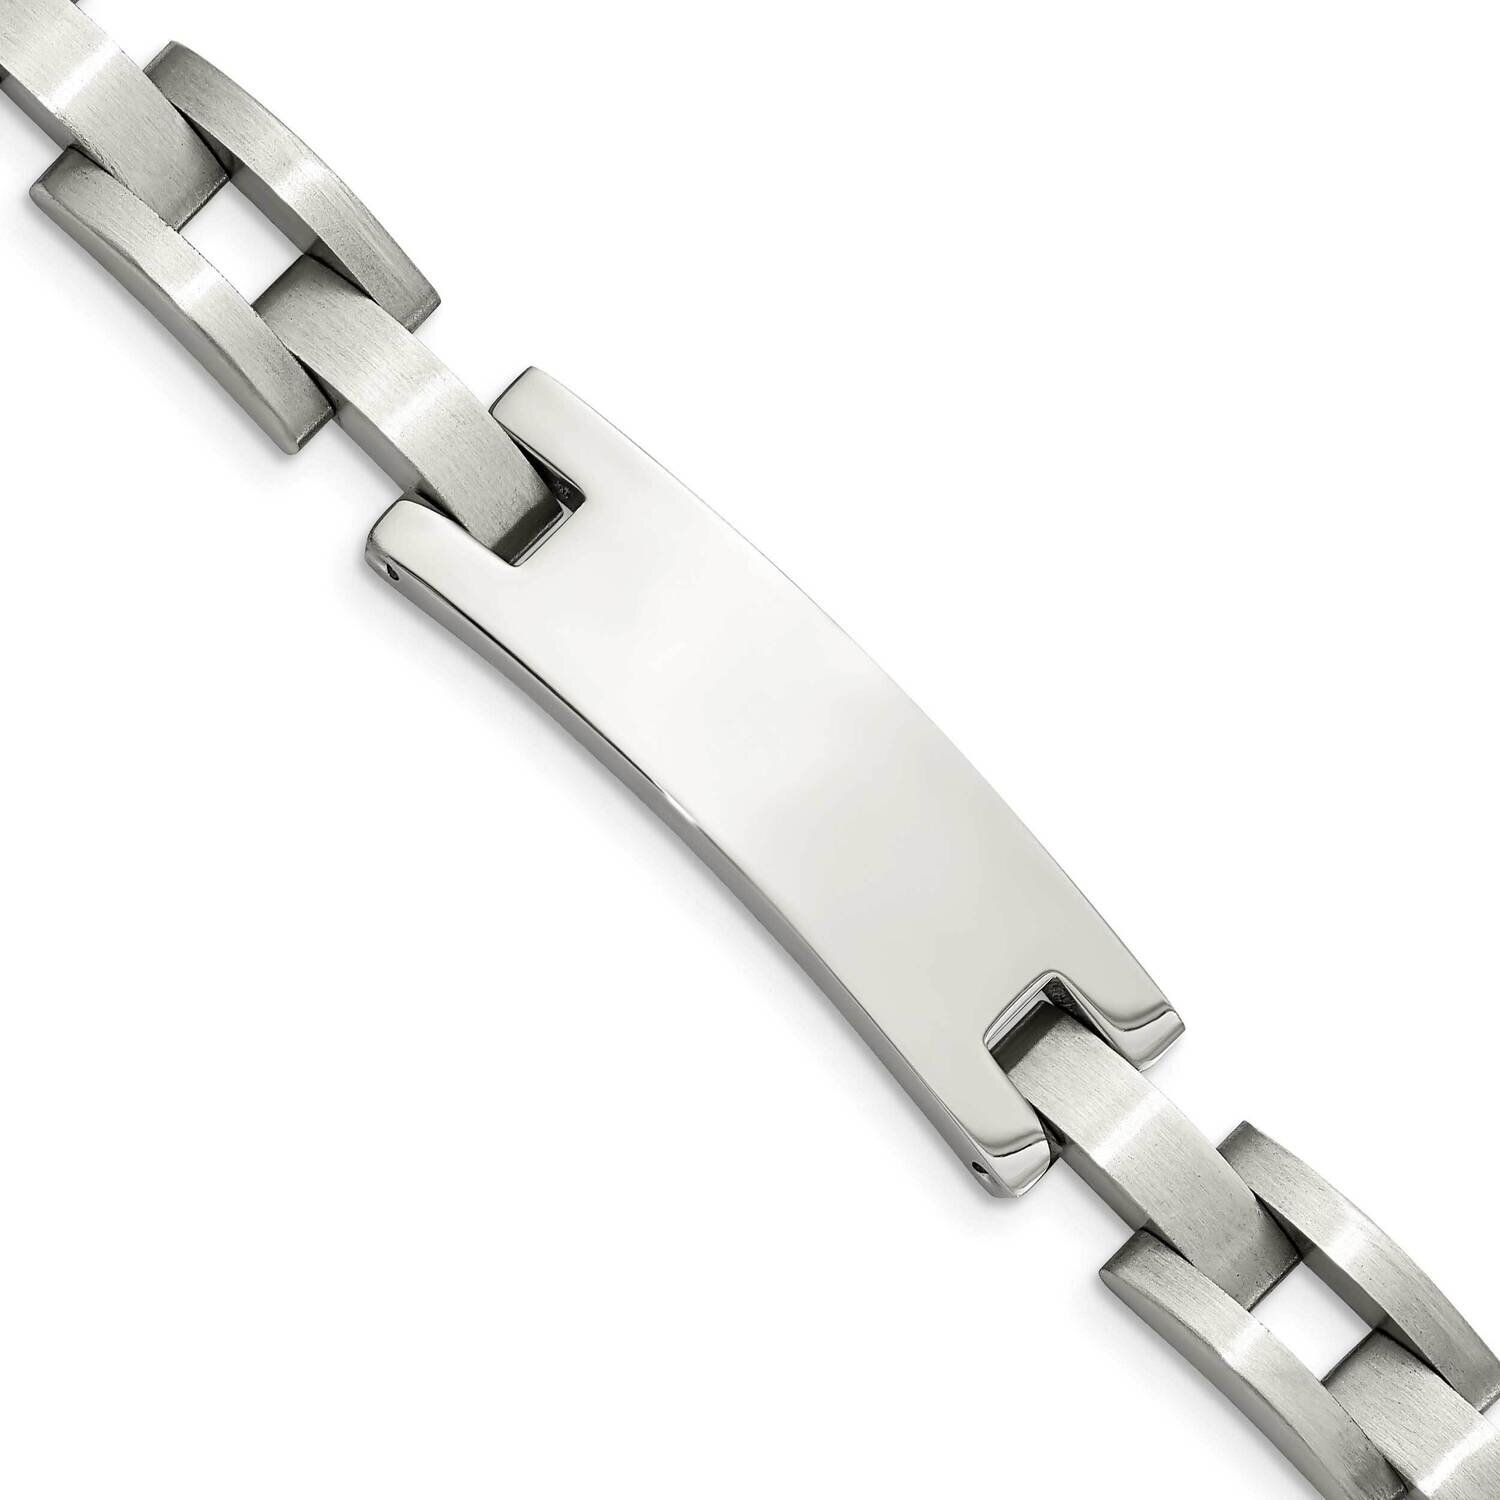 ID 9.25 Inch Bracelet Stainless Steel Brushed and Polished SRB229-9.25